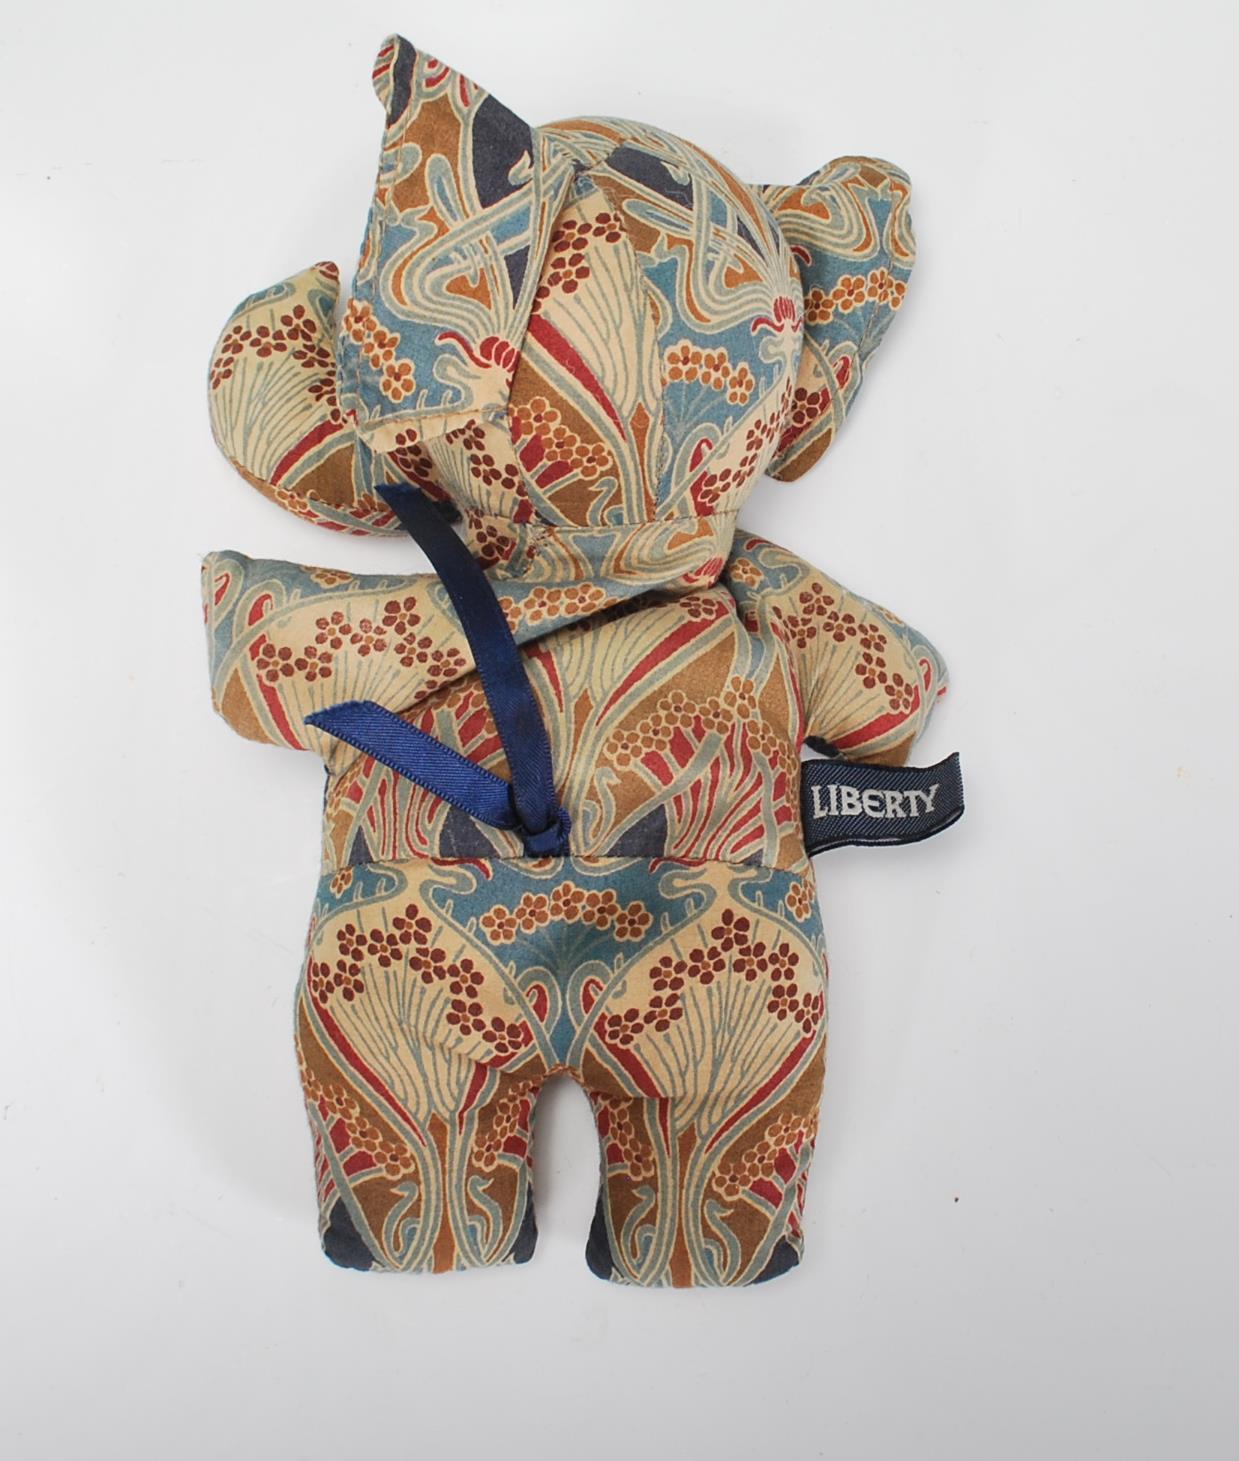 A 20th Century Liberty & Co London handmade elephant beanie toy made from decorative Art Nouveau - Image 6 of 6